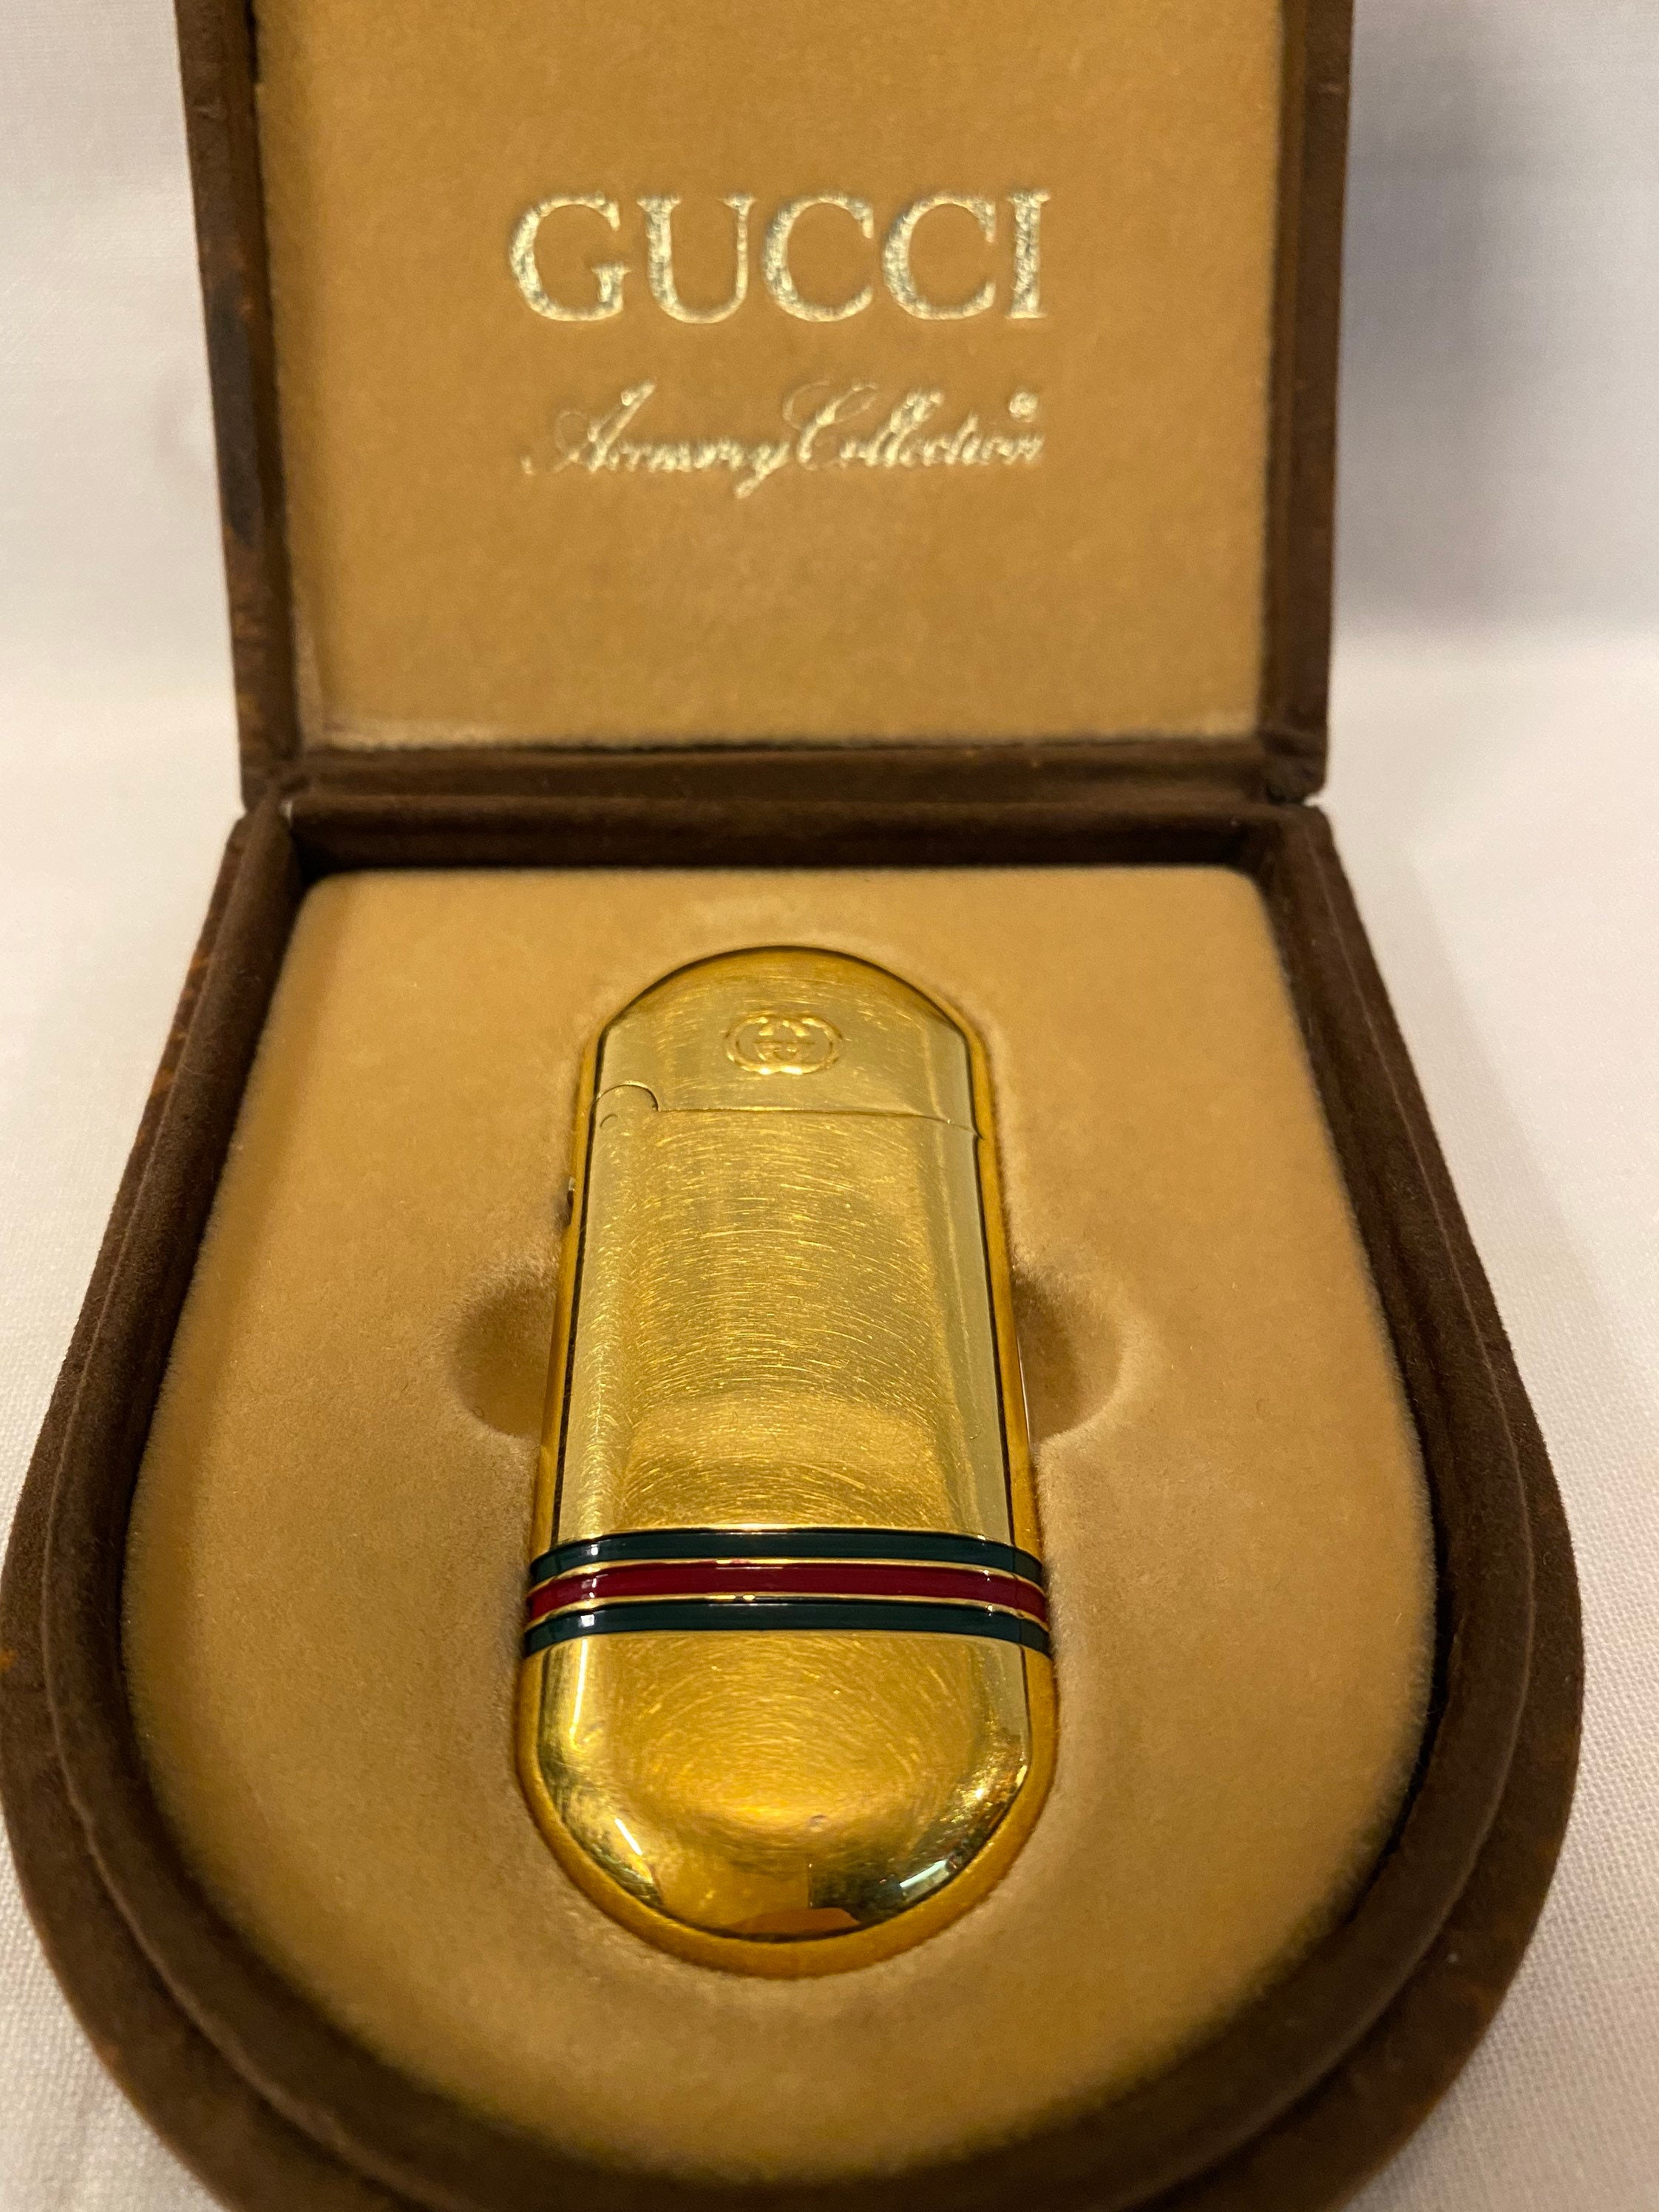 Lighter Gucci Authentic /lighter Cigars Gucci/gucci - Etsy Singapore